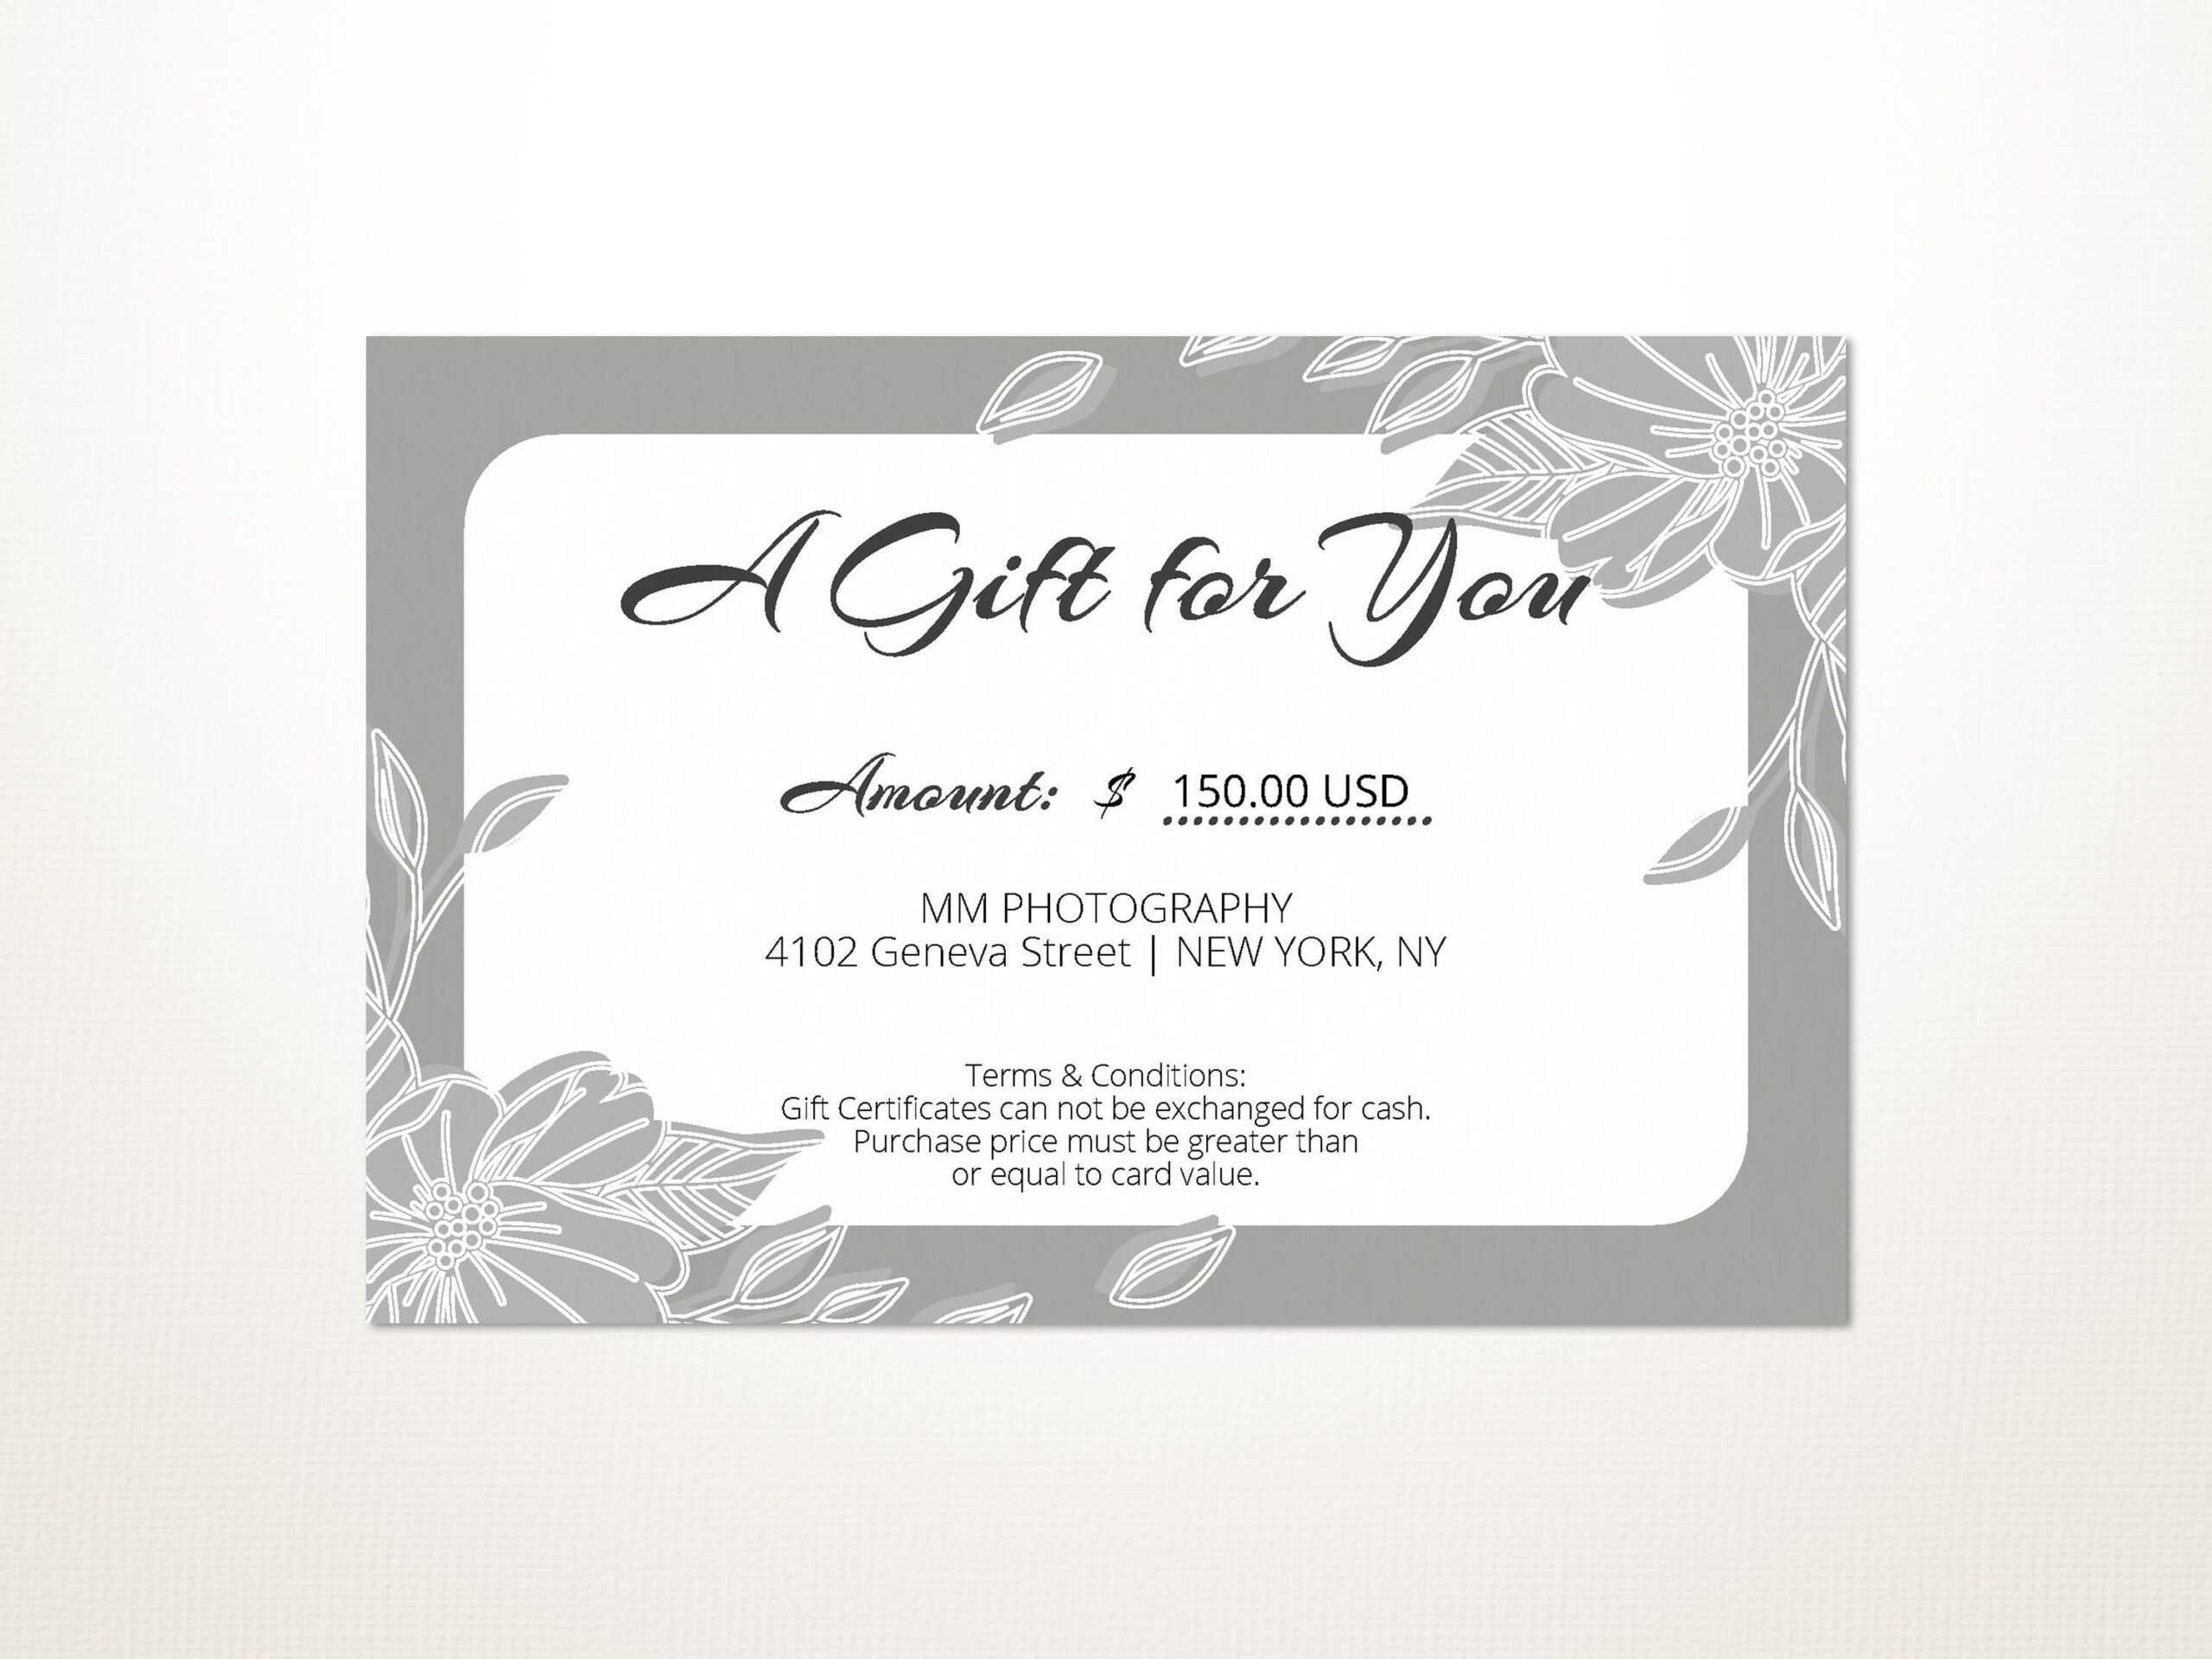 022 Wedding Gift Card Template Free Photographer Certificate Throughout Photography Referral Card Templates